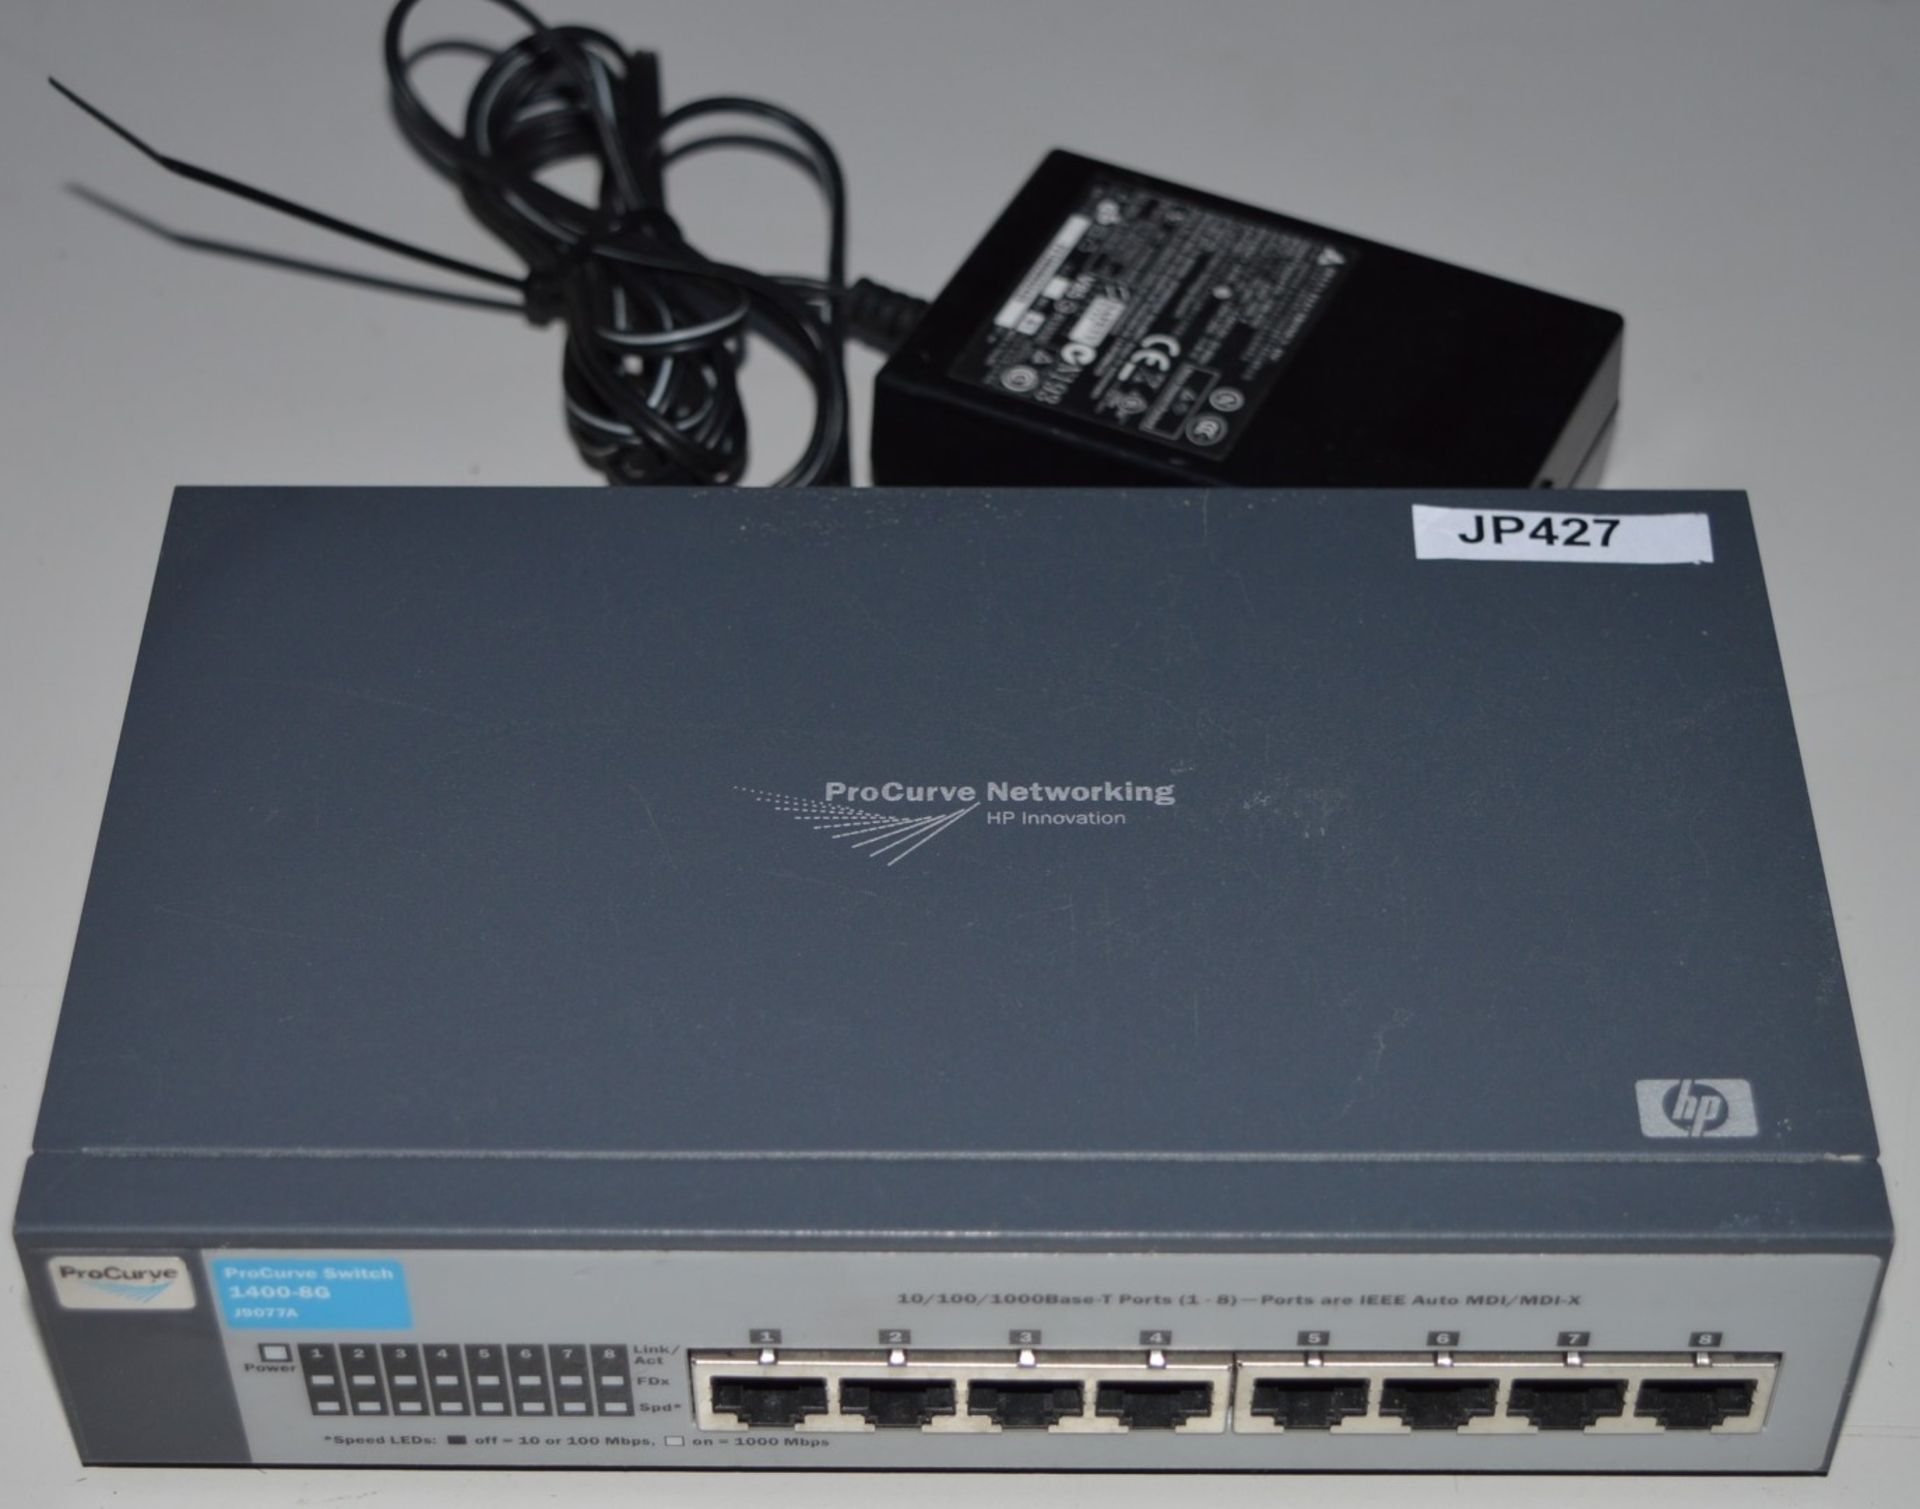 1 x HP ProCurve J9077A 1400-8G Network Switch - Includes Power Supply - Ref JP427 - CL011 - - Image 2 of 4